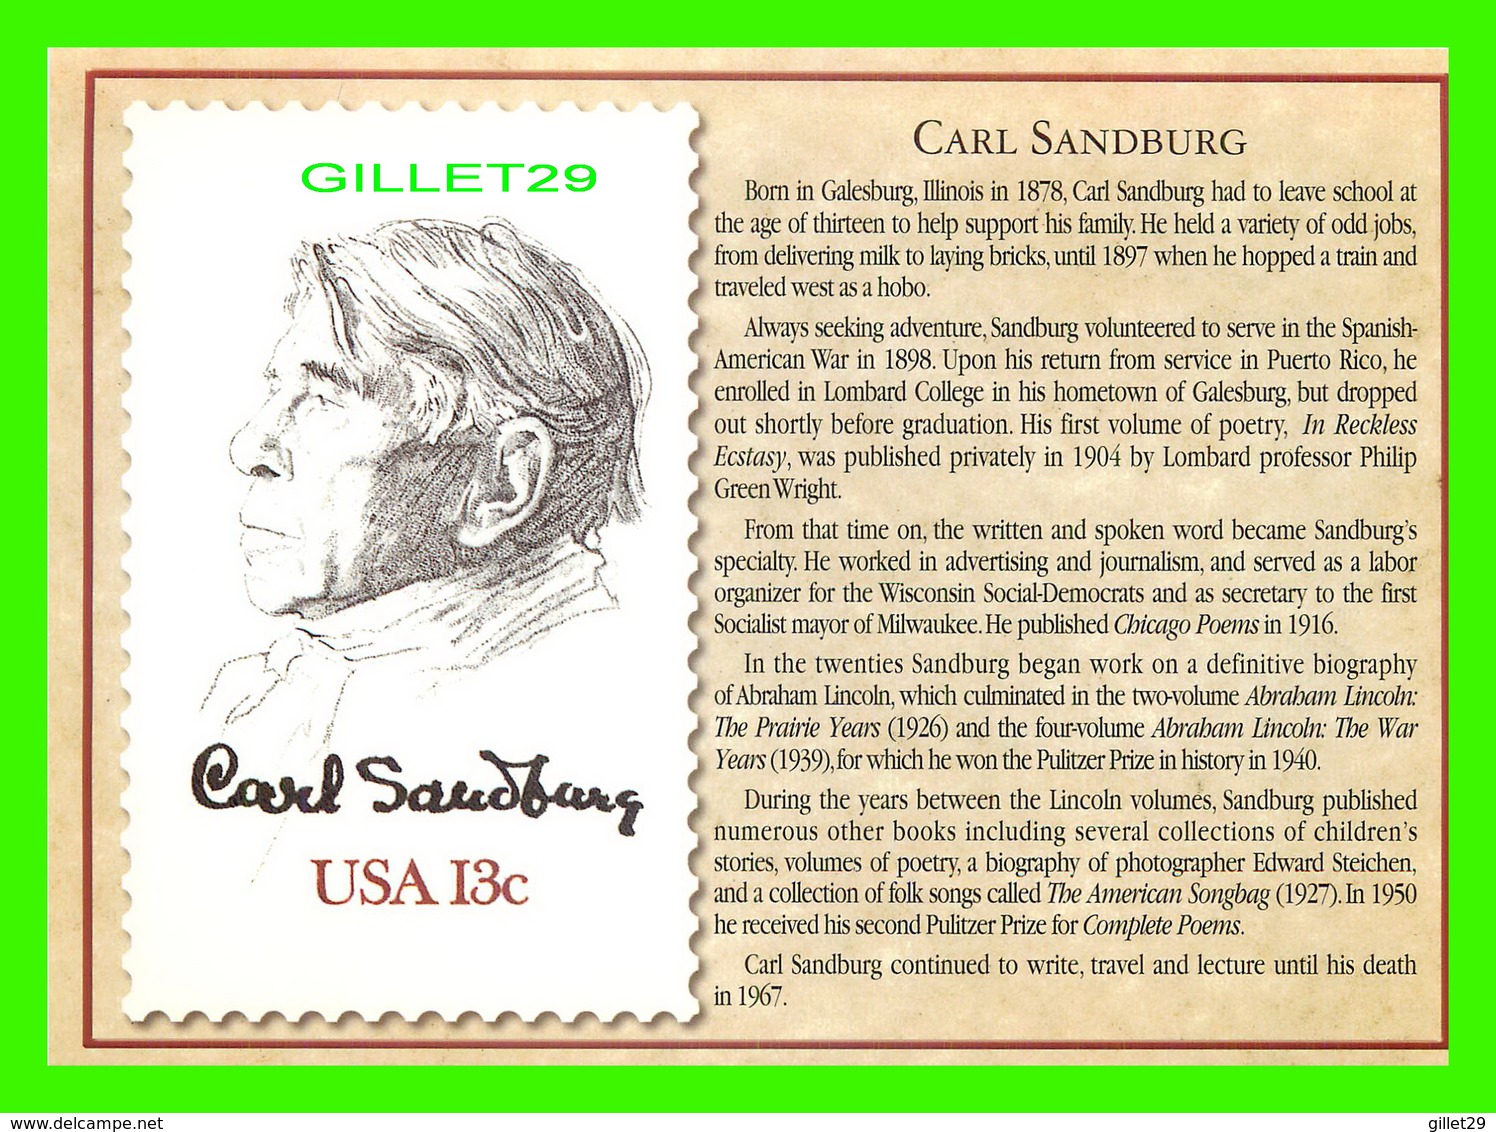 TIMBRES REPRÉSENTATIOINS - GREAT AMERICAN WRITERS, CARL SANDBURG (1878-1967) - STAMP ISSUE DATE,1978 - Stamps (pictures)